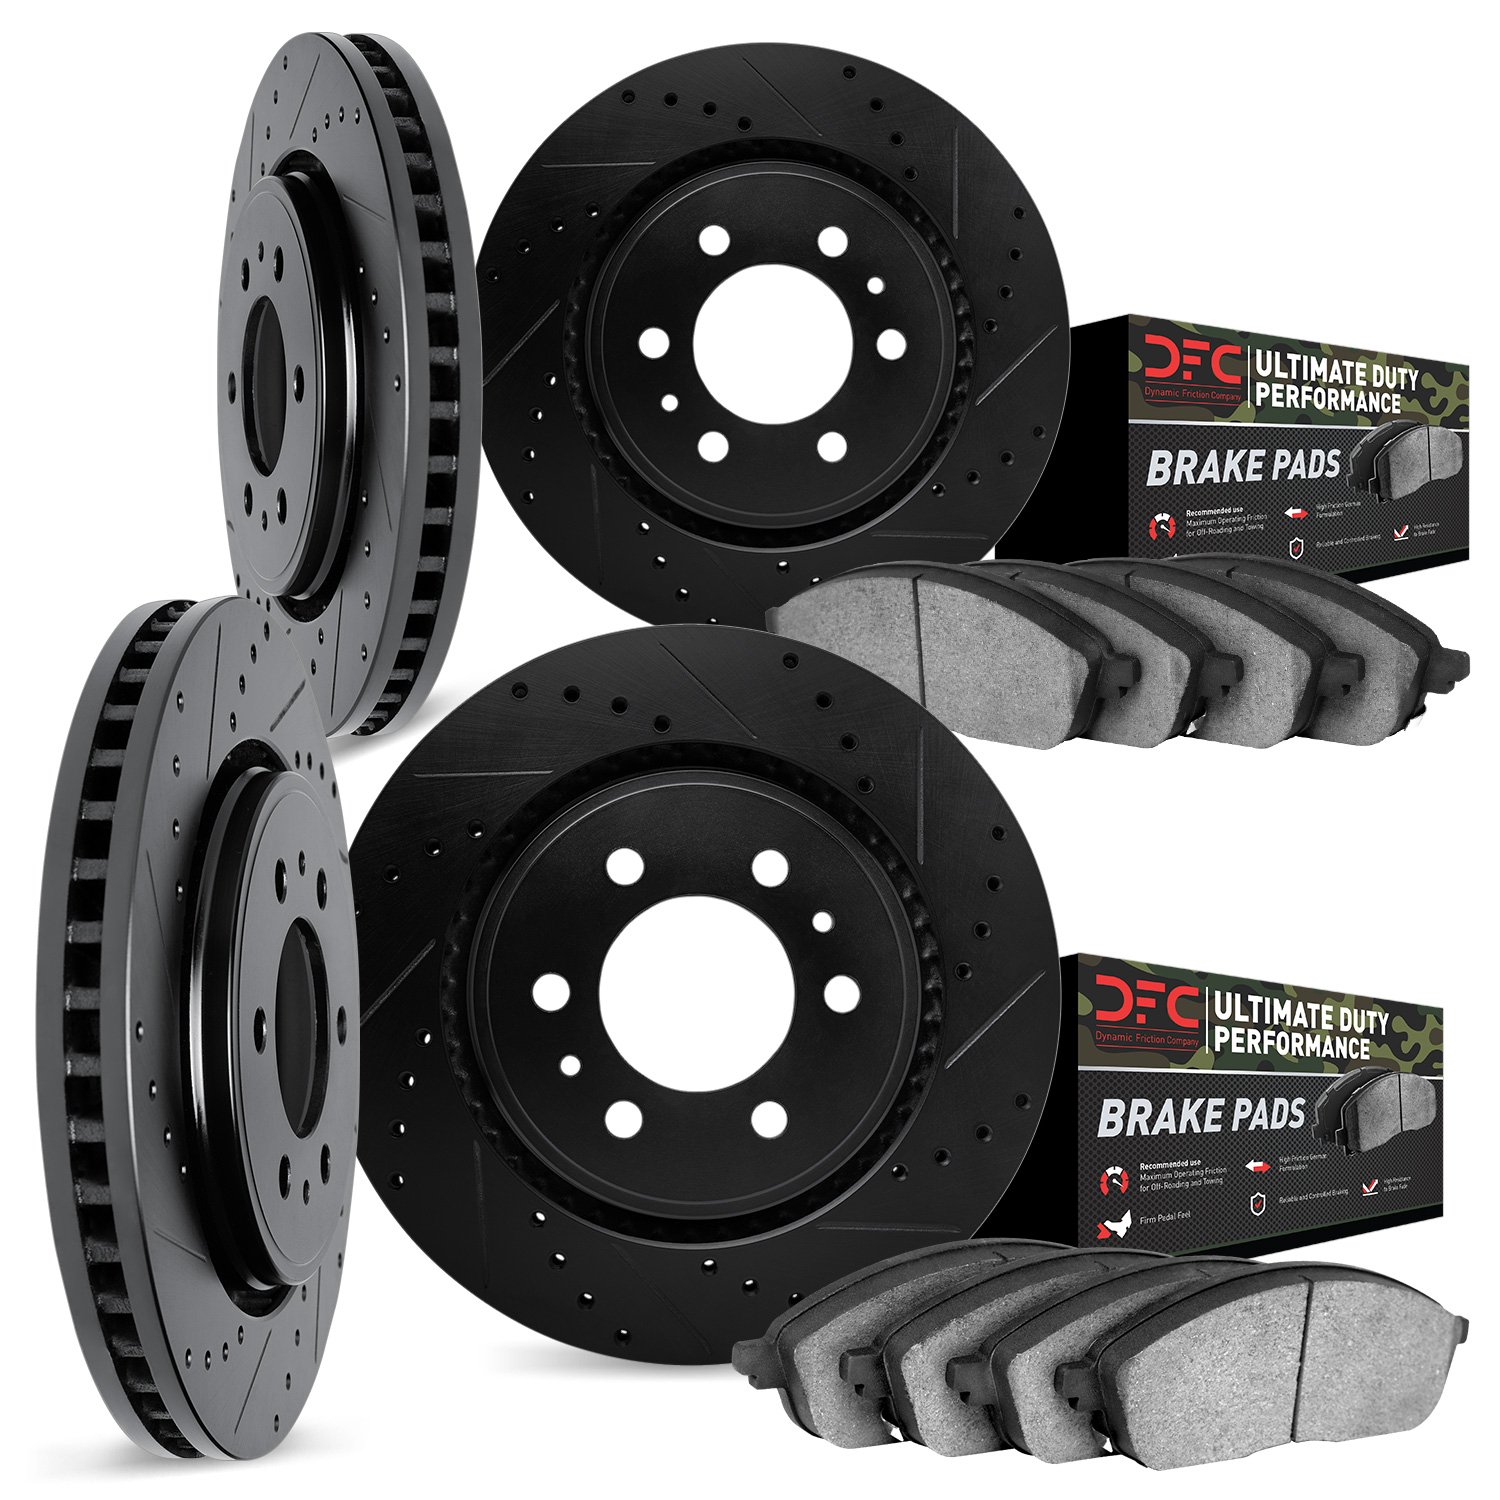 8404-40009 Drilled/Slotted Brake Rotors with Ultimate-Duty Brake Pads Kit [Black], Fits Select Mopar, Position: Front and Rear